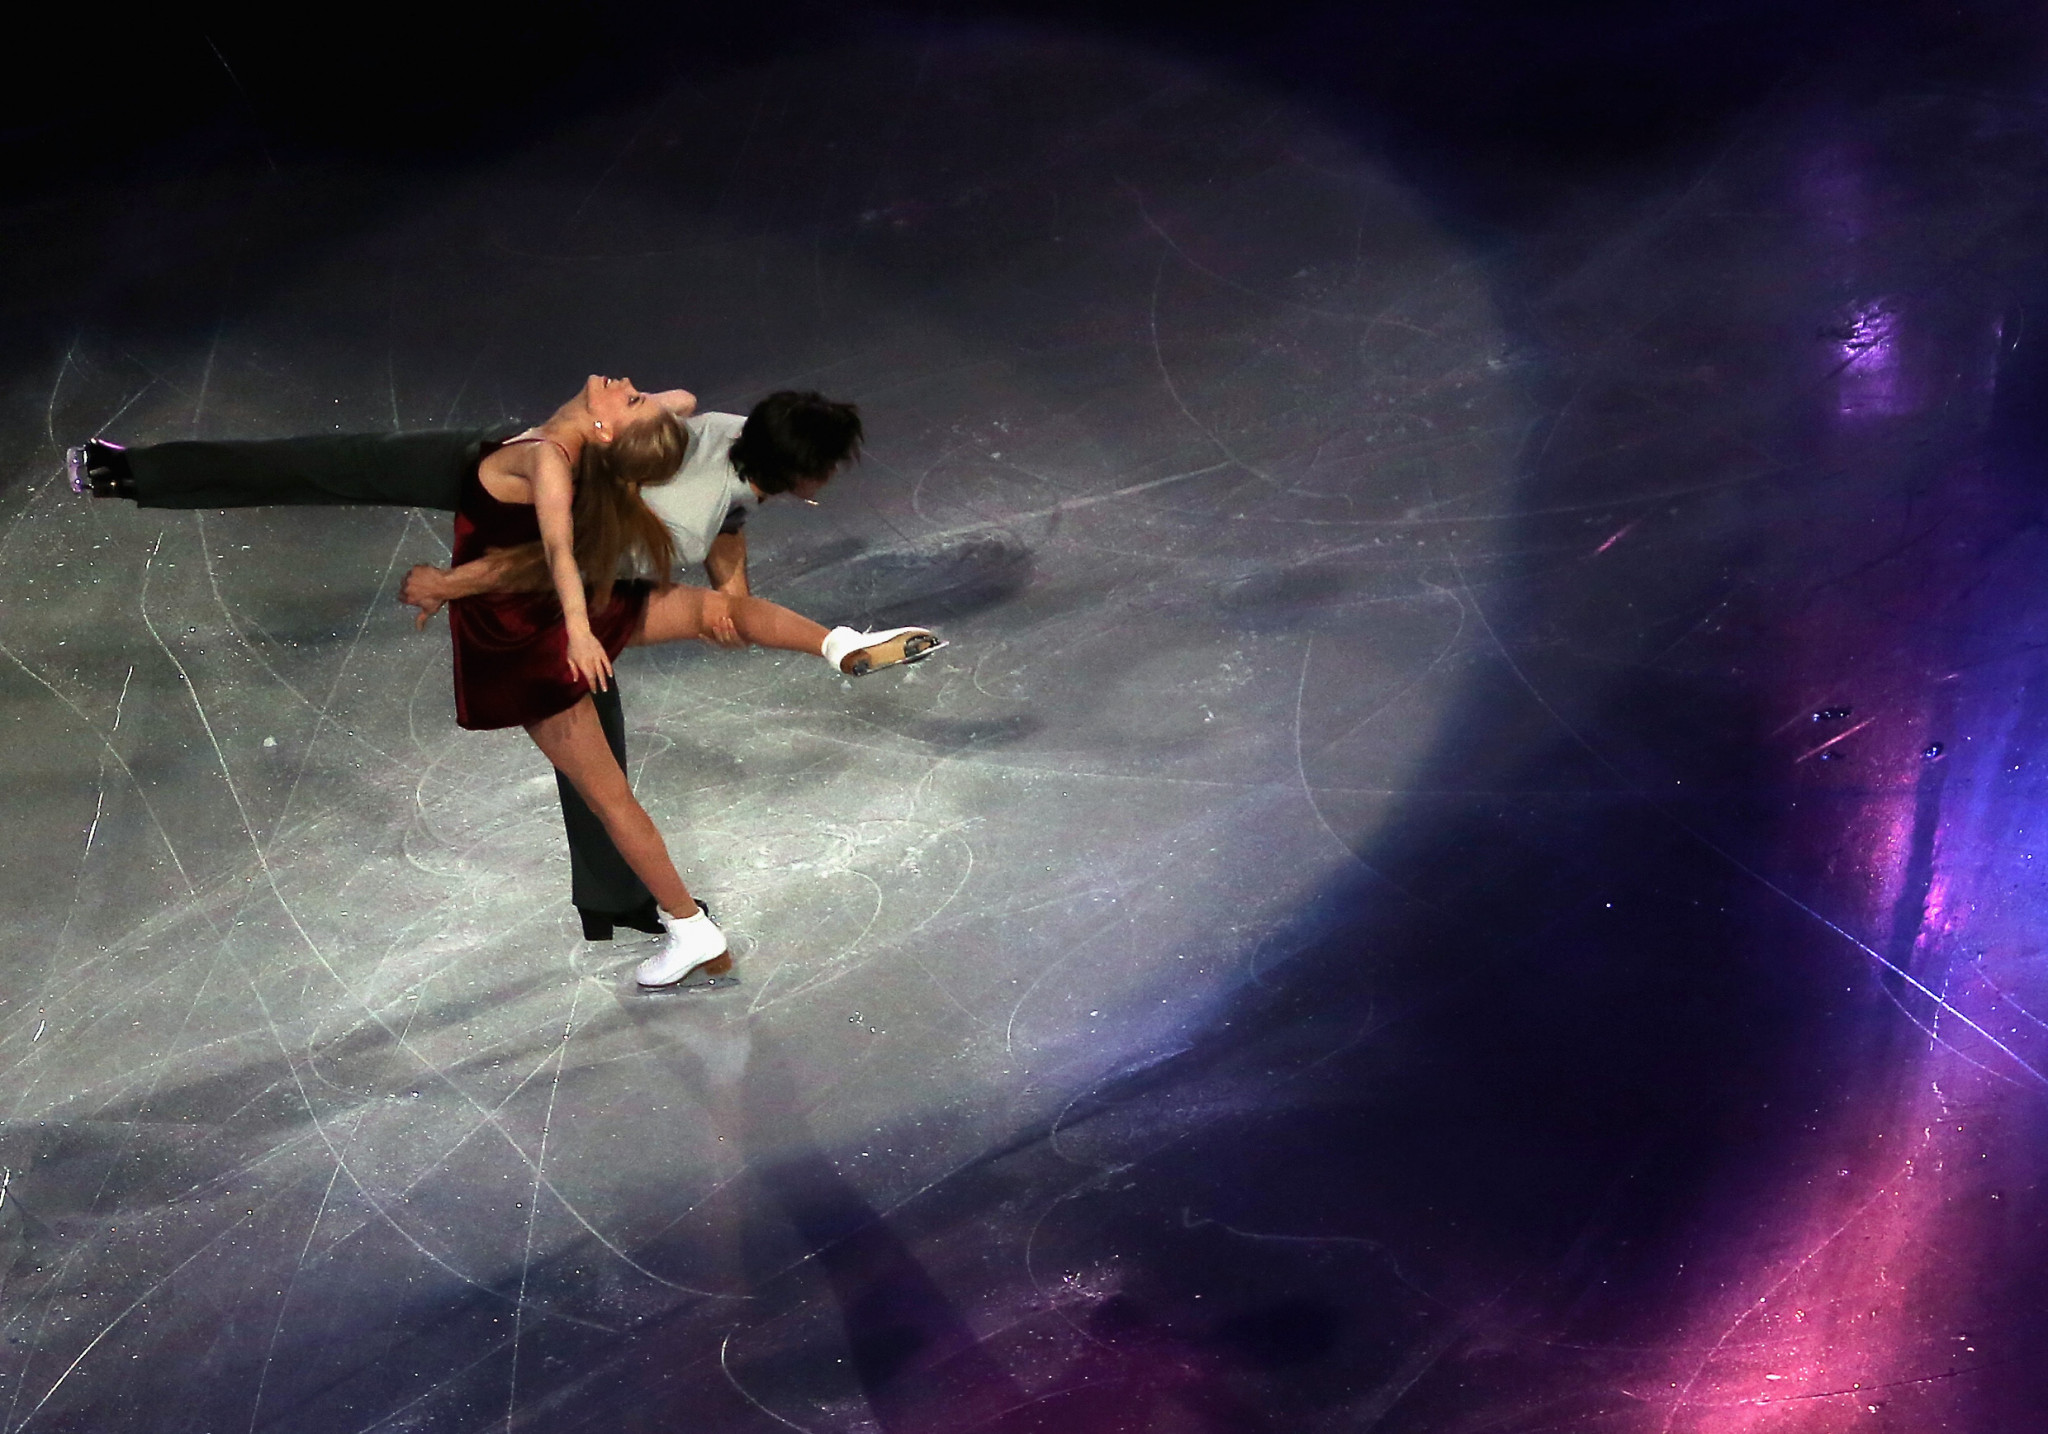 Canada last hosted the ISU World Figure Skating Championships in 2013, in London, Ontario ©Getty Images